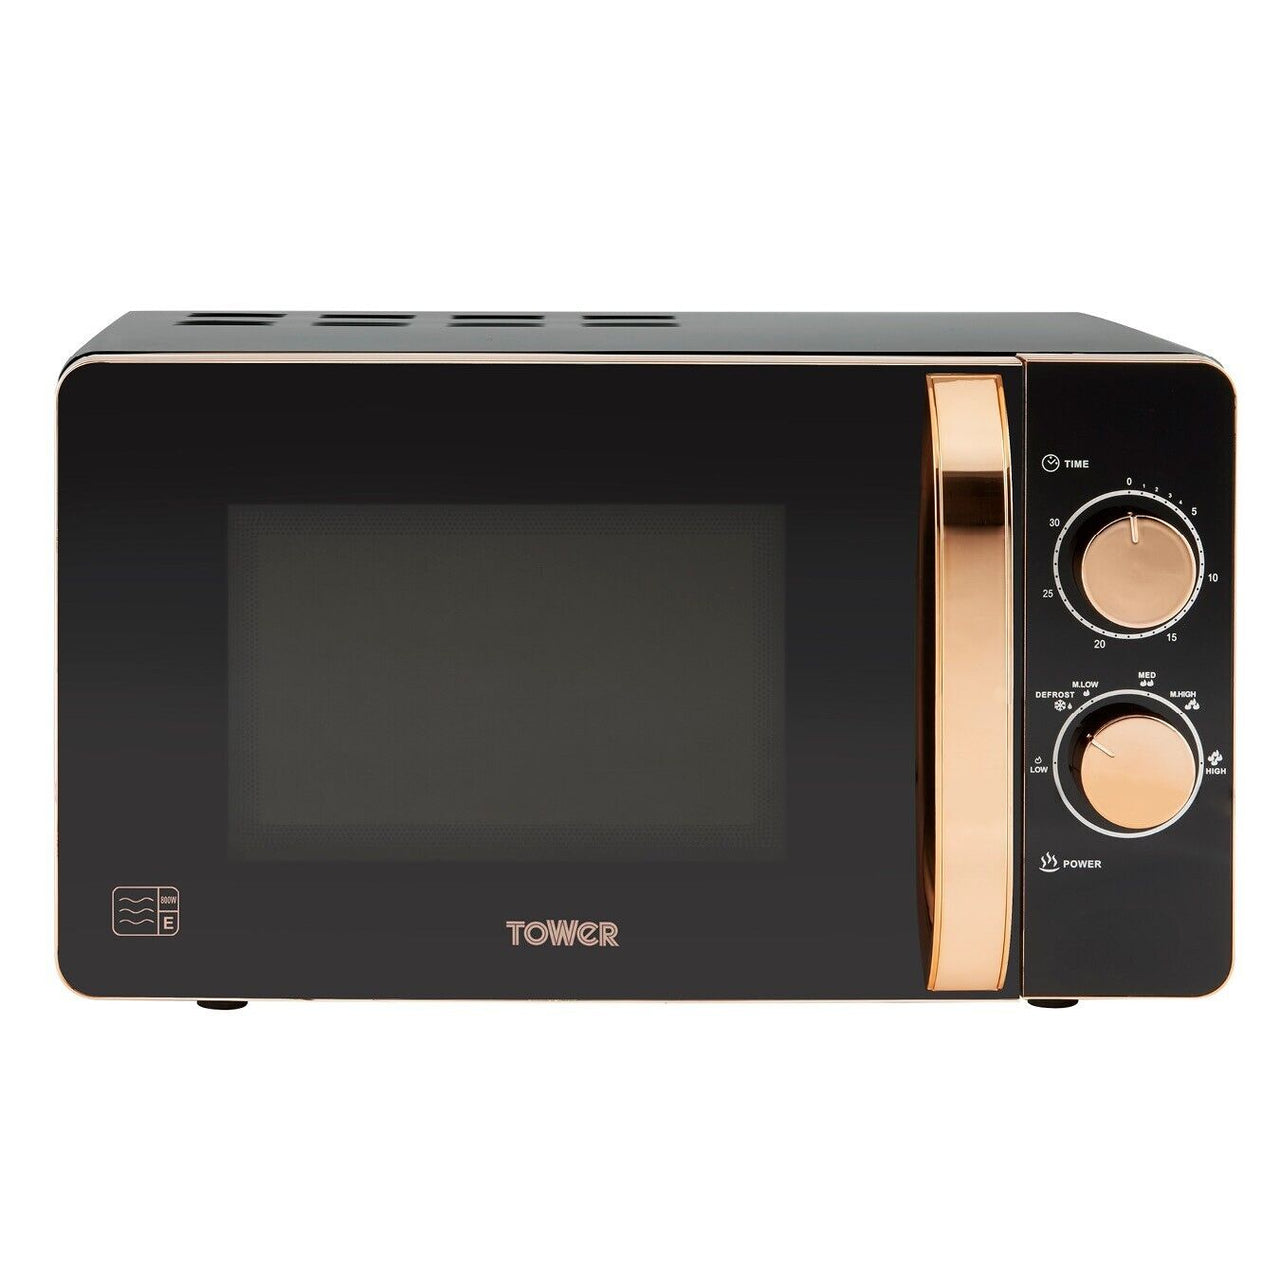 Tower Rose Gold & Black 800W 20L Manual Microwave. Brand New 3 Year Guarantee